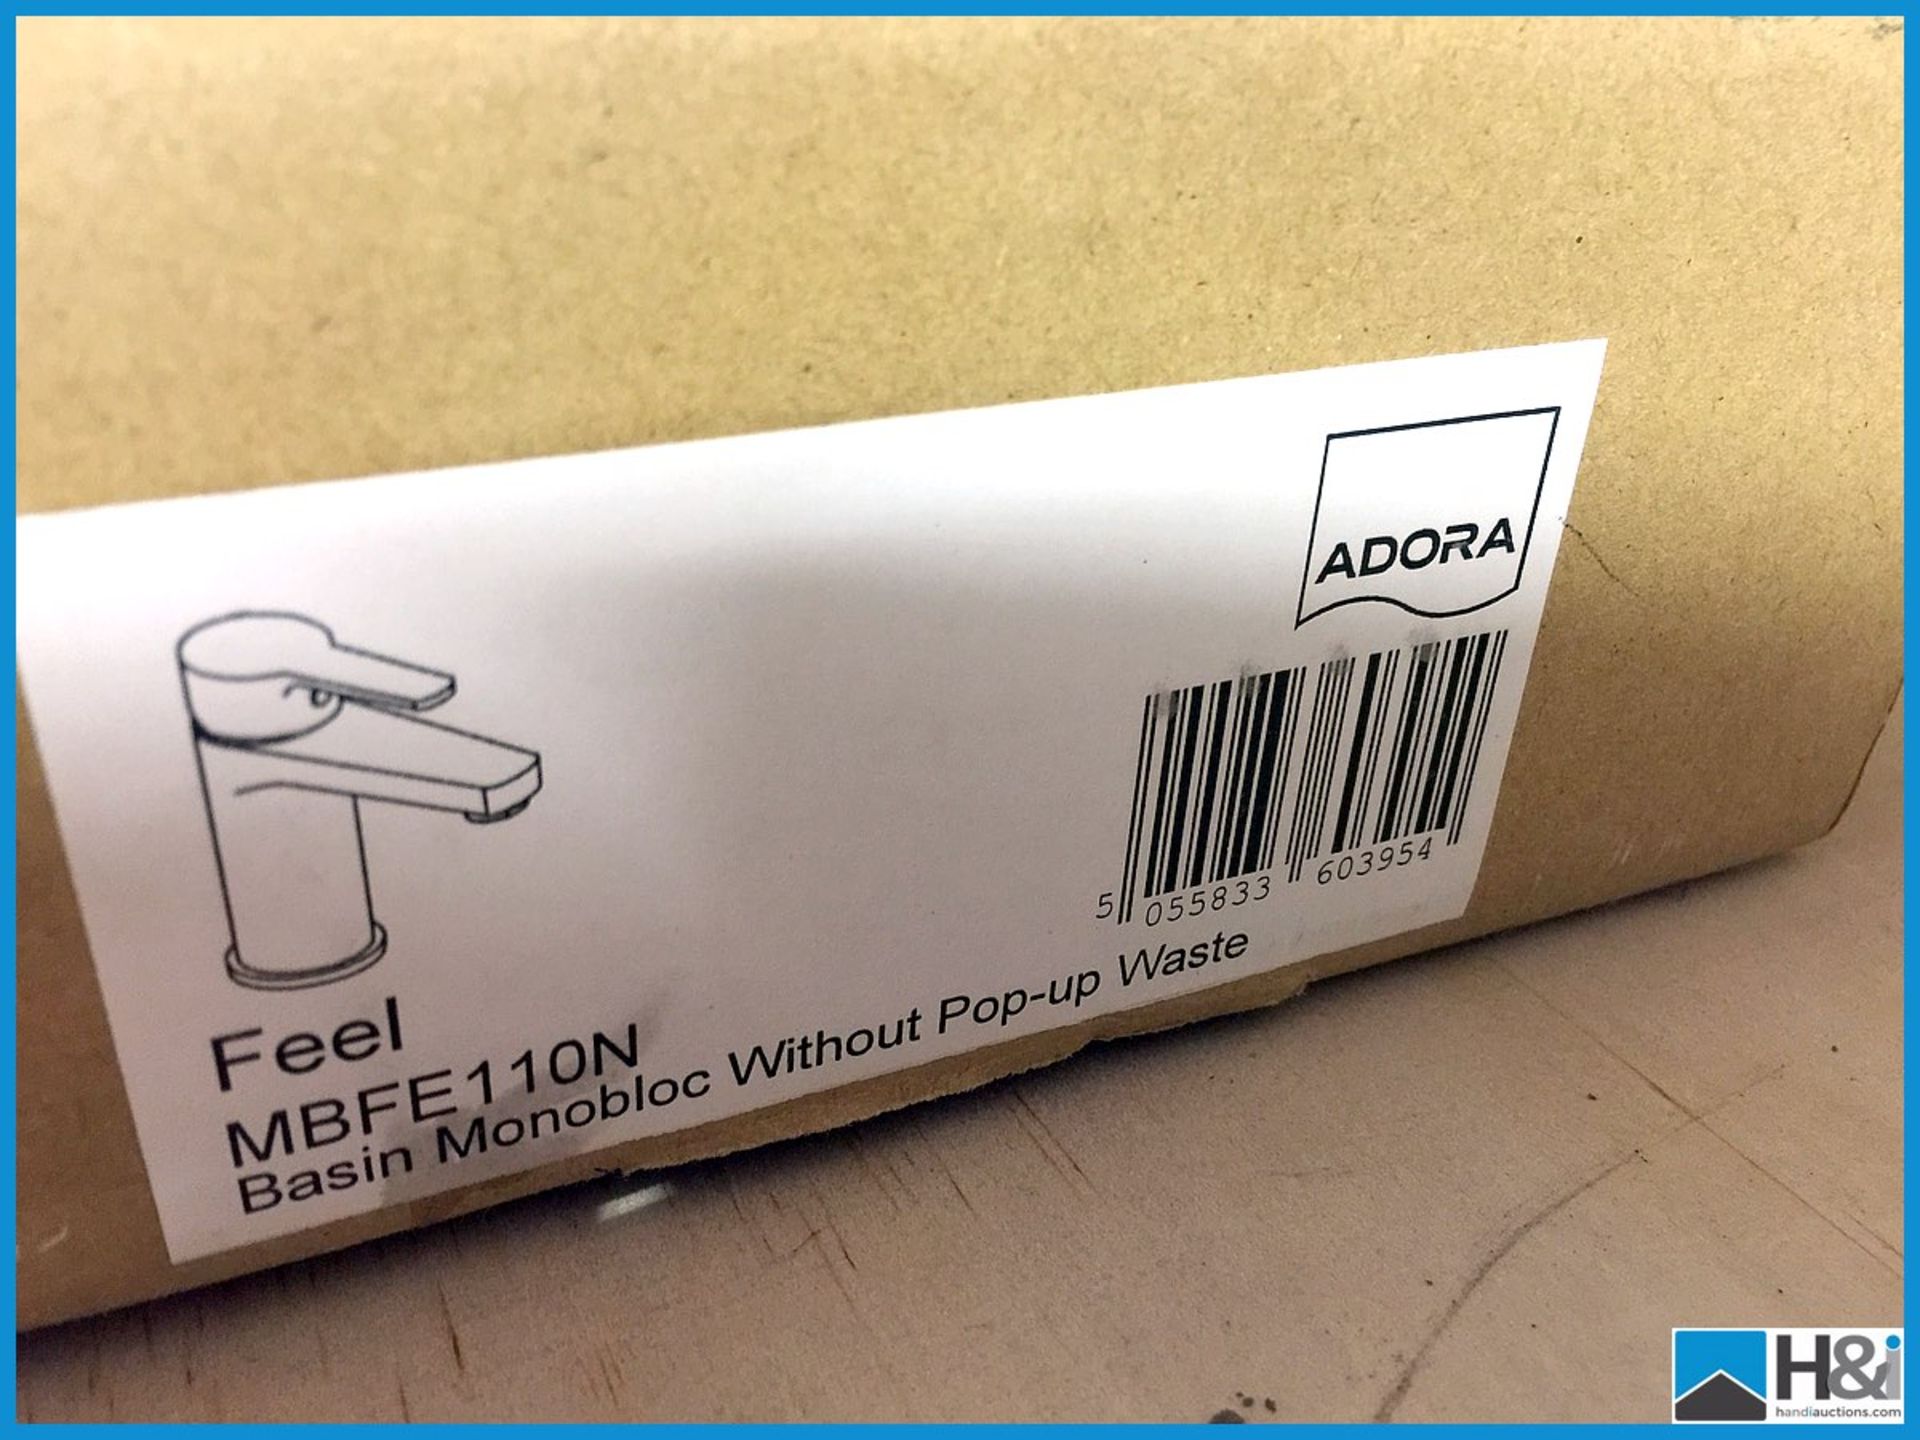 Adora 'feel' mono basin mixer tap boxed ex display condition Appraisal: Viewing Essential Serial No: - Image 2 of 3